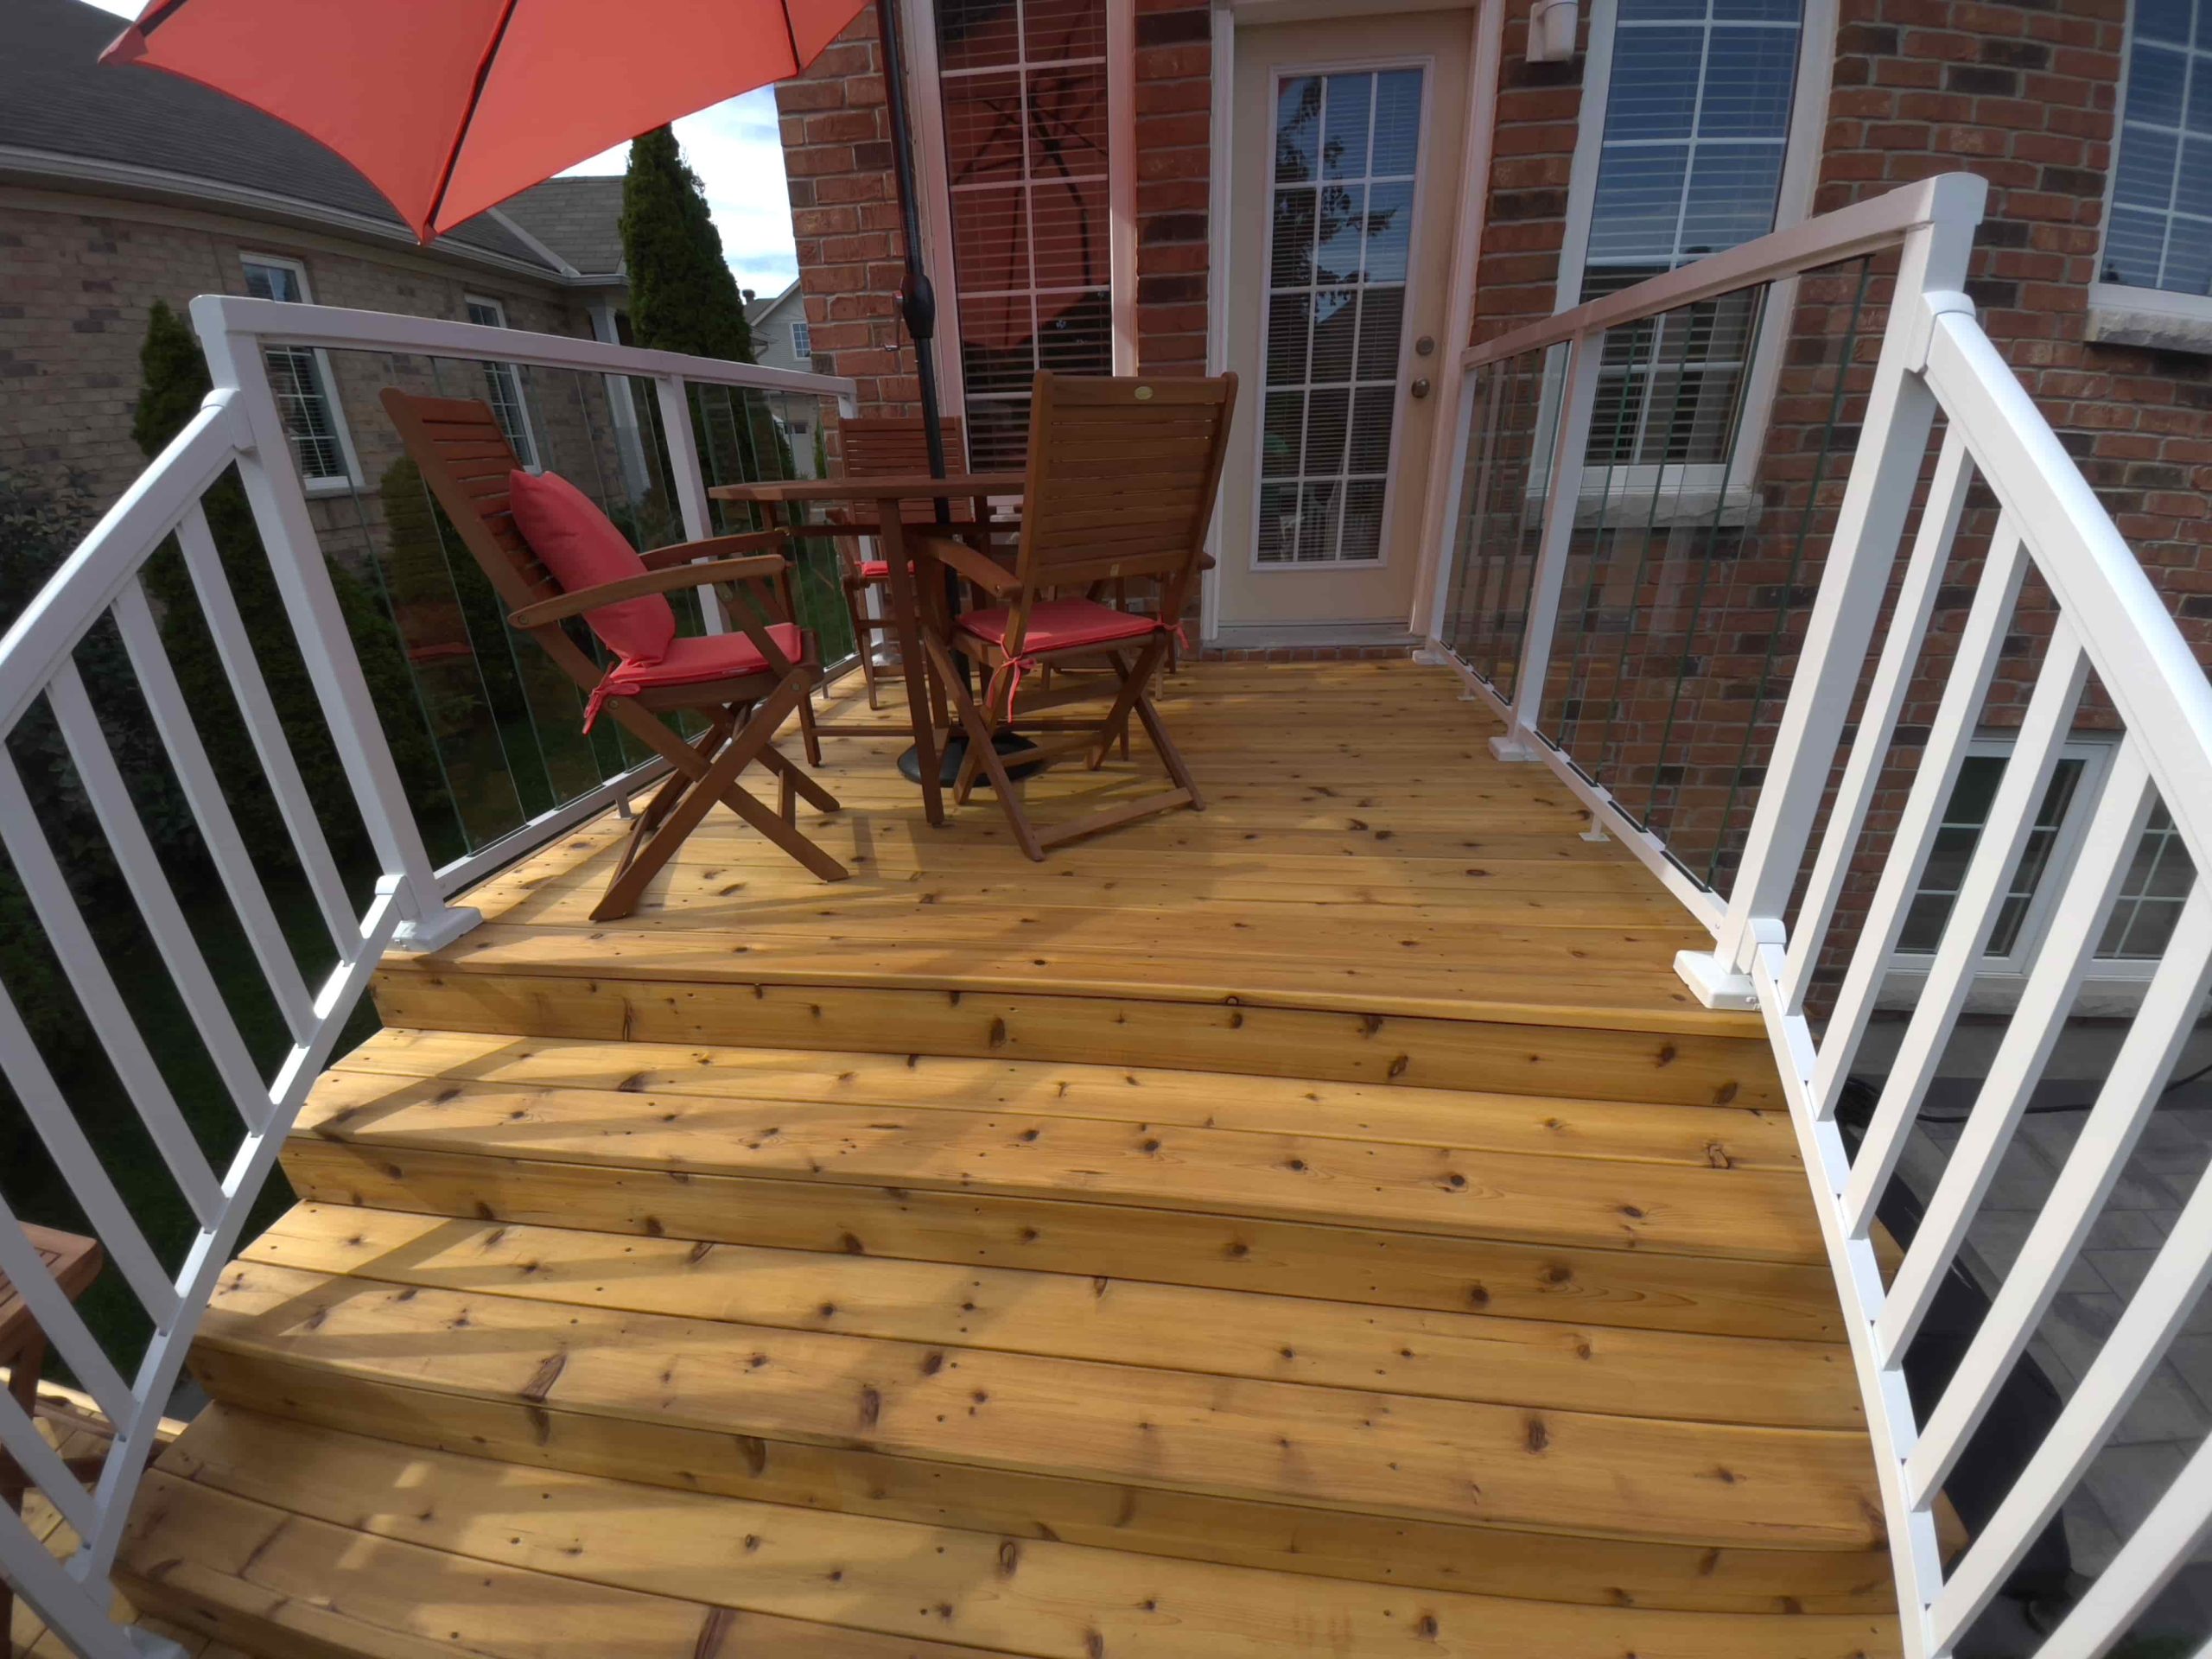 A cozy wooden deck boasts a stylish white railing, offering a perfect spot for outdoor relaxation